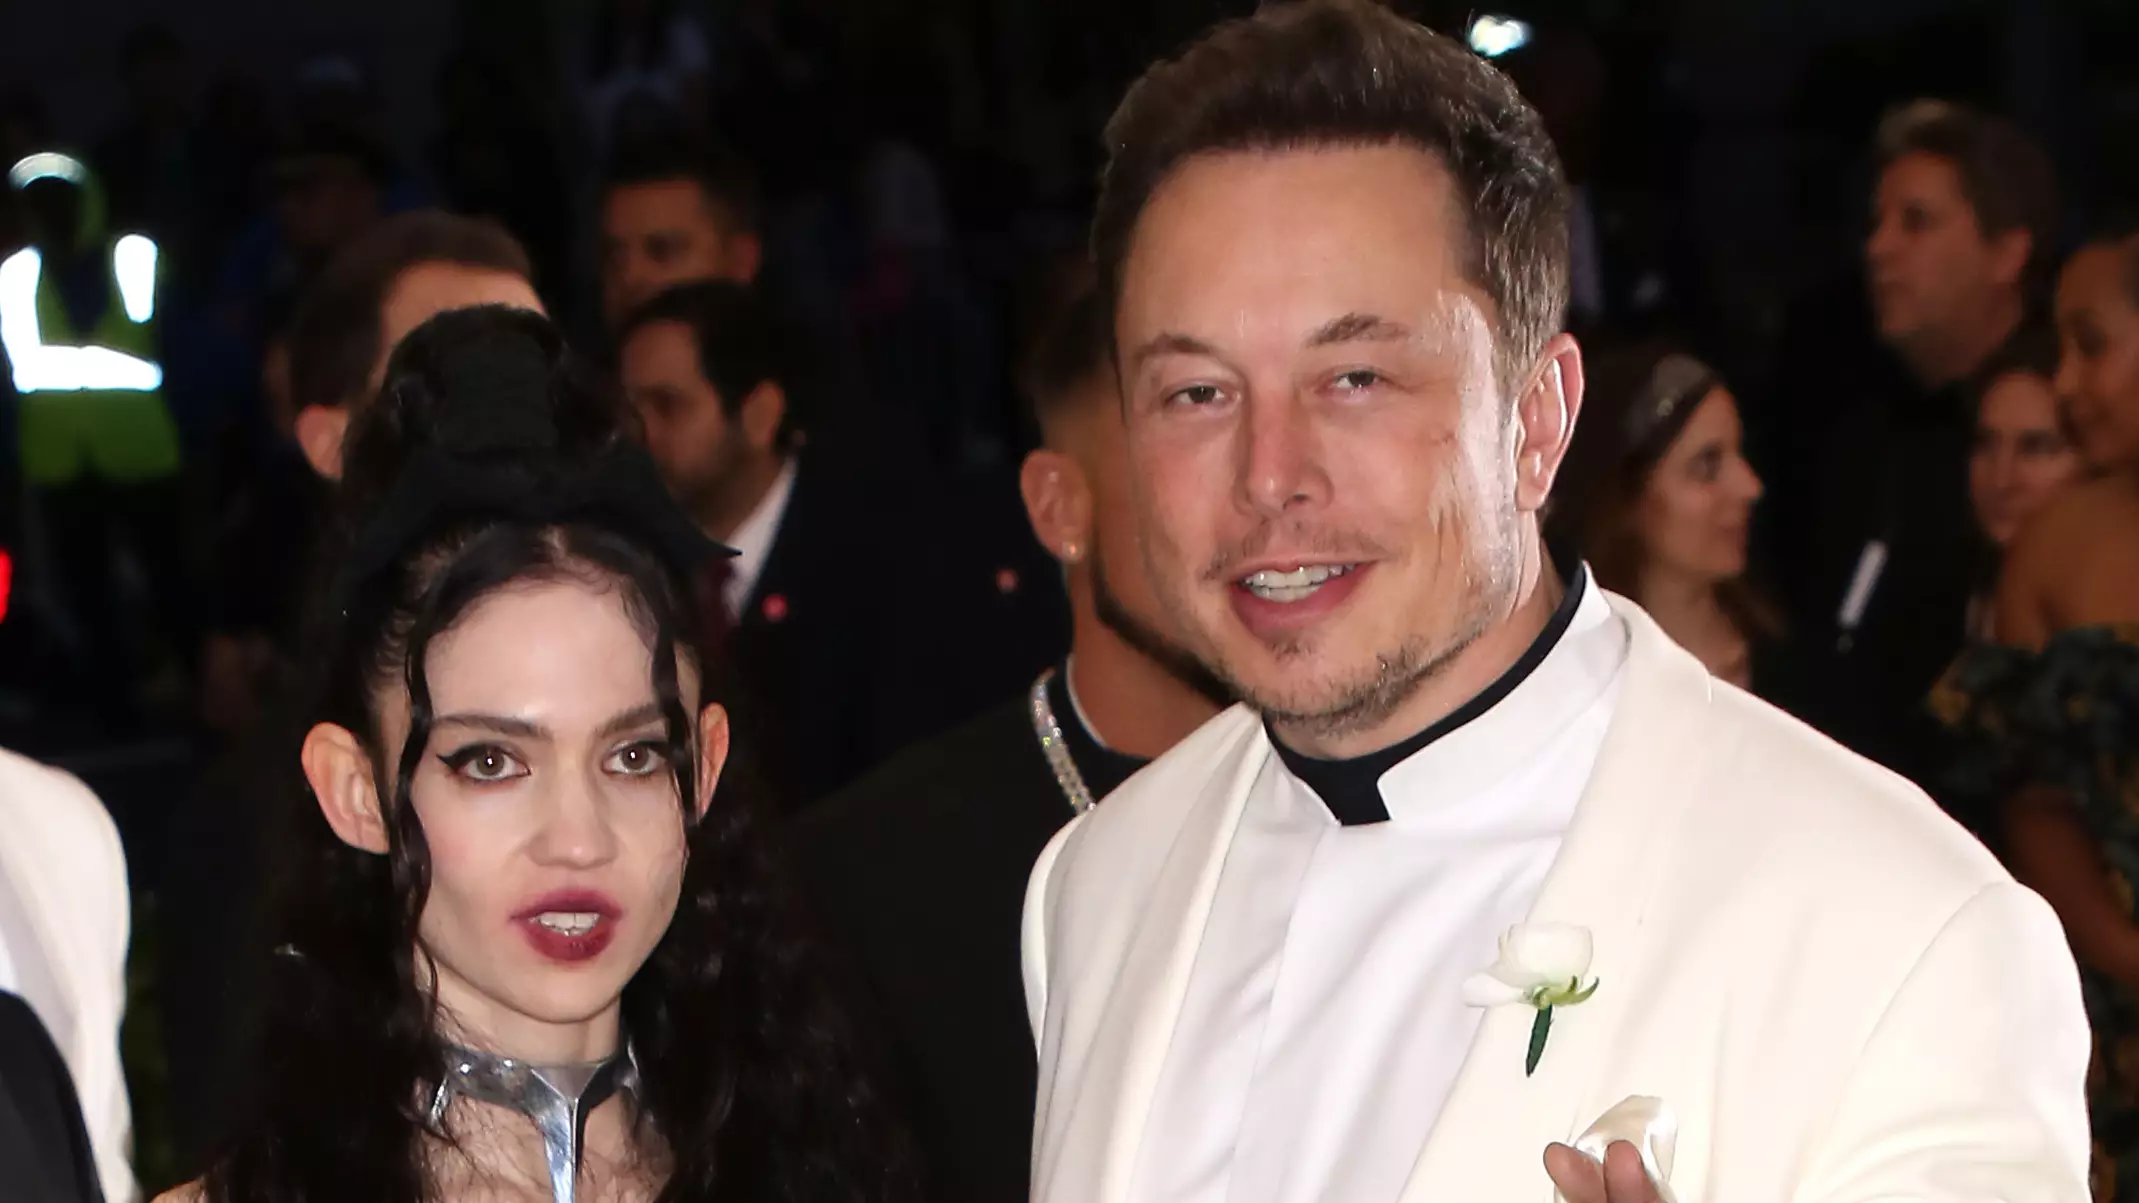 Californian Law Prevents Elon Musk And Grimes From Calling Newborn Son X Æ A-12